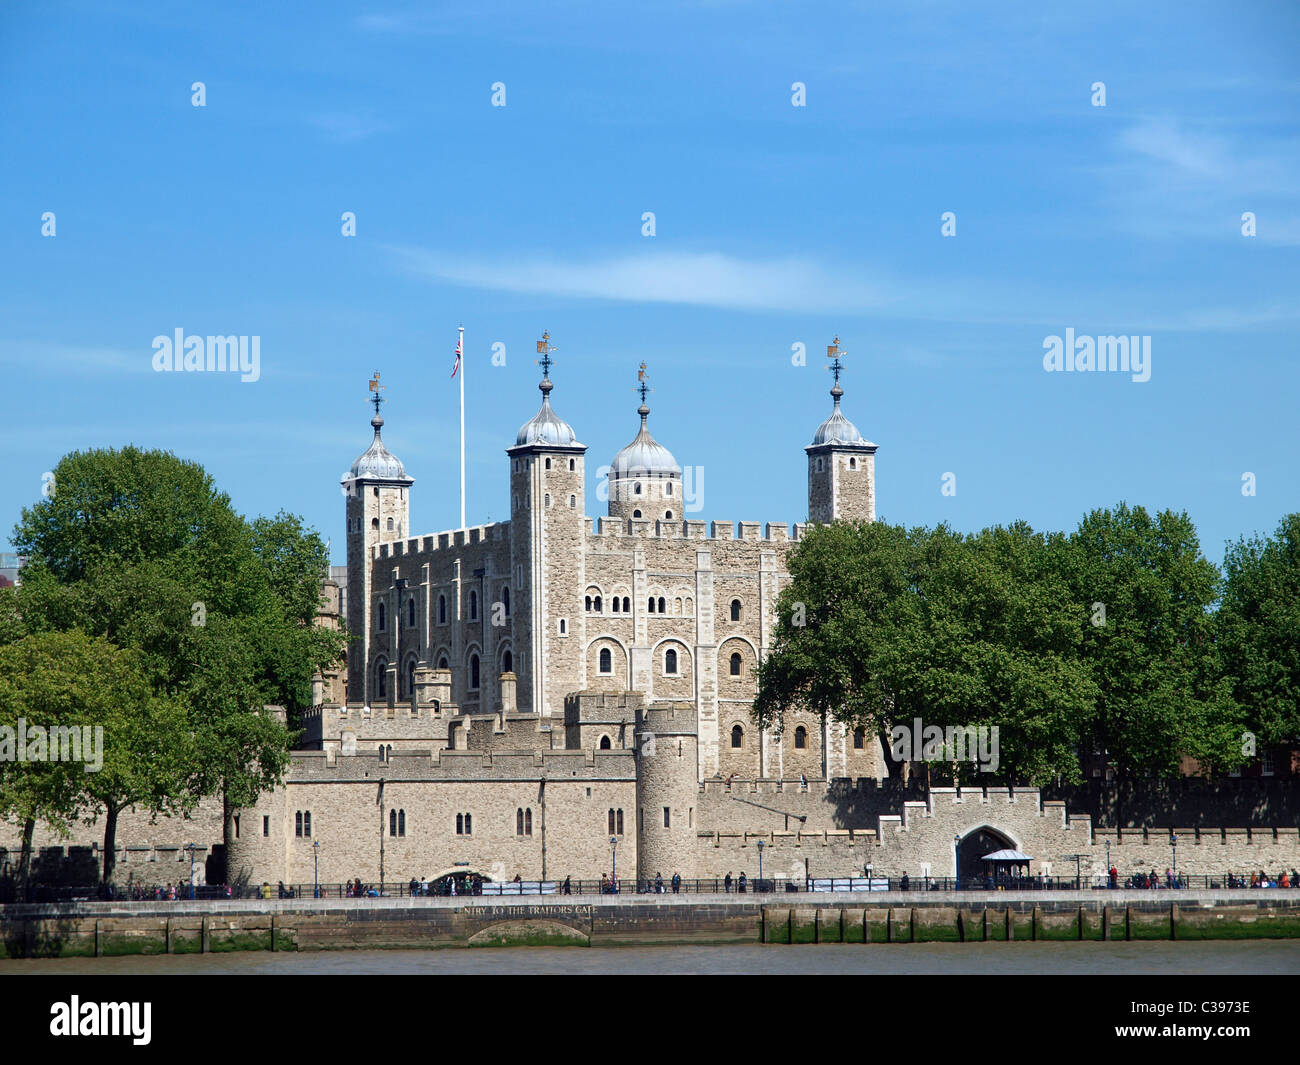 The Tower of London United Kingdom Great Britain Travel Stock Photo